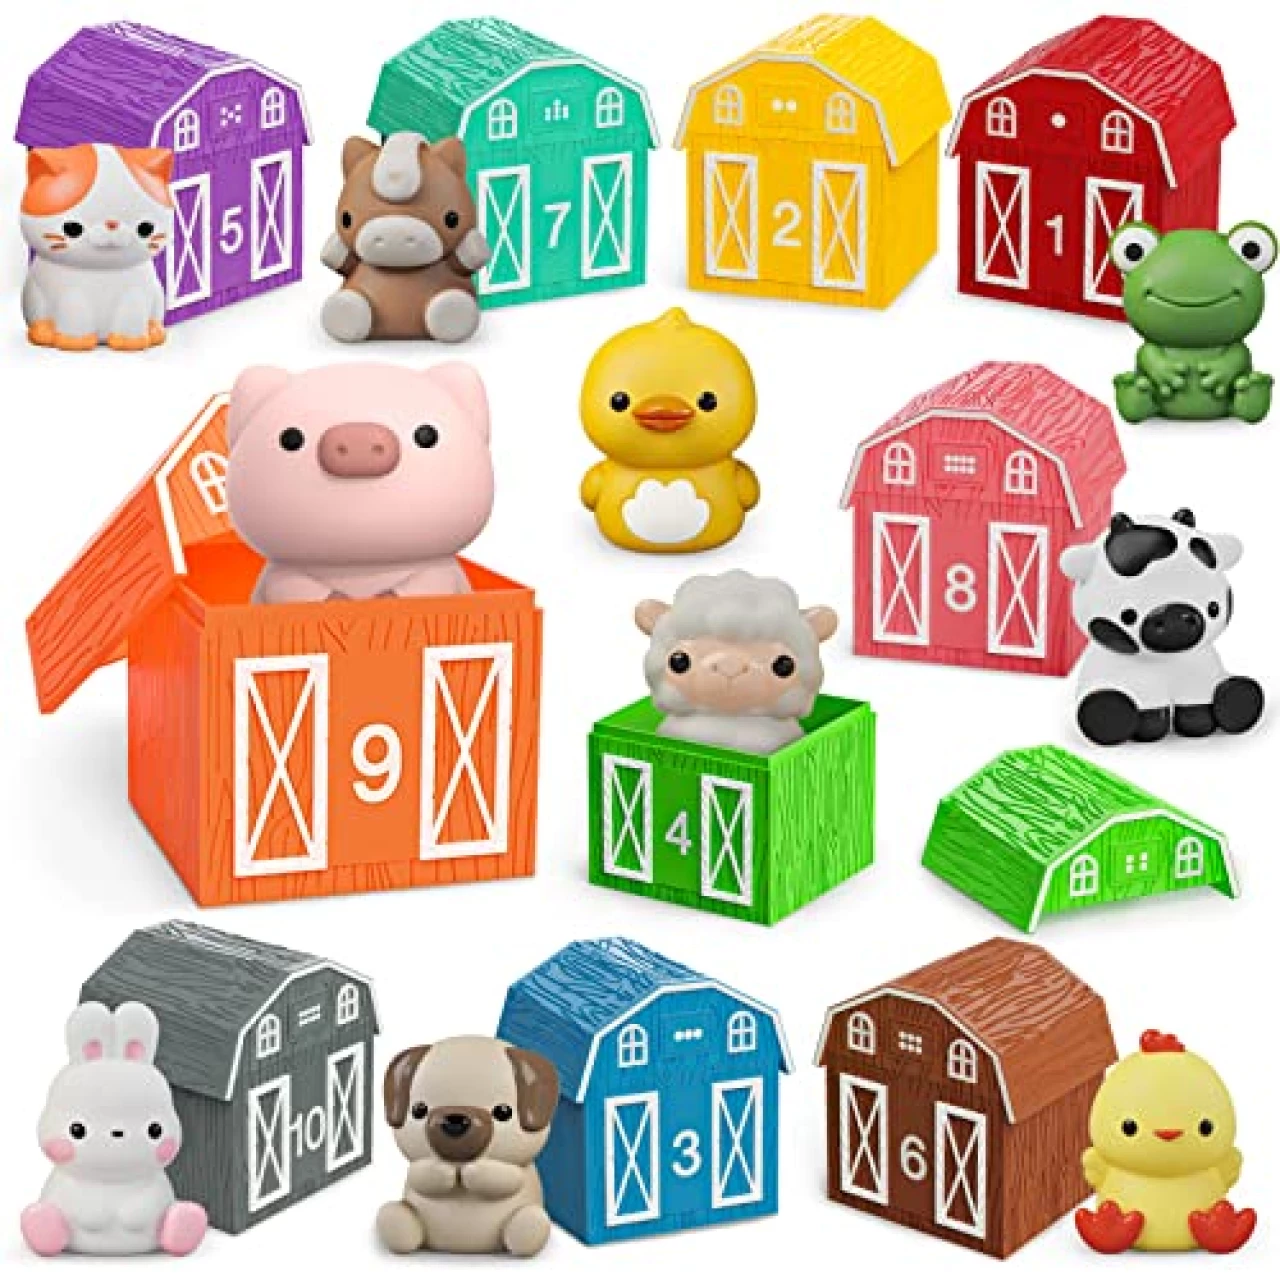 Learning Barn Toys for Toddlers 1 2 3 Years Old, 20 Pcs Farm Animal Finger Puppets for Kids